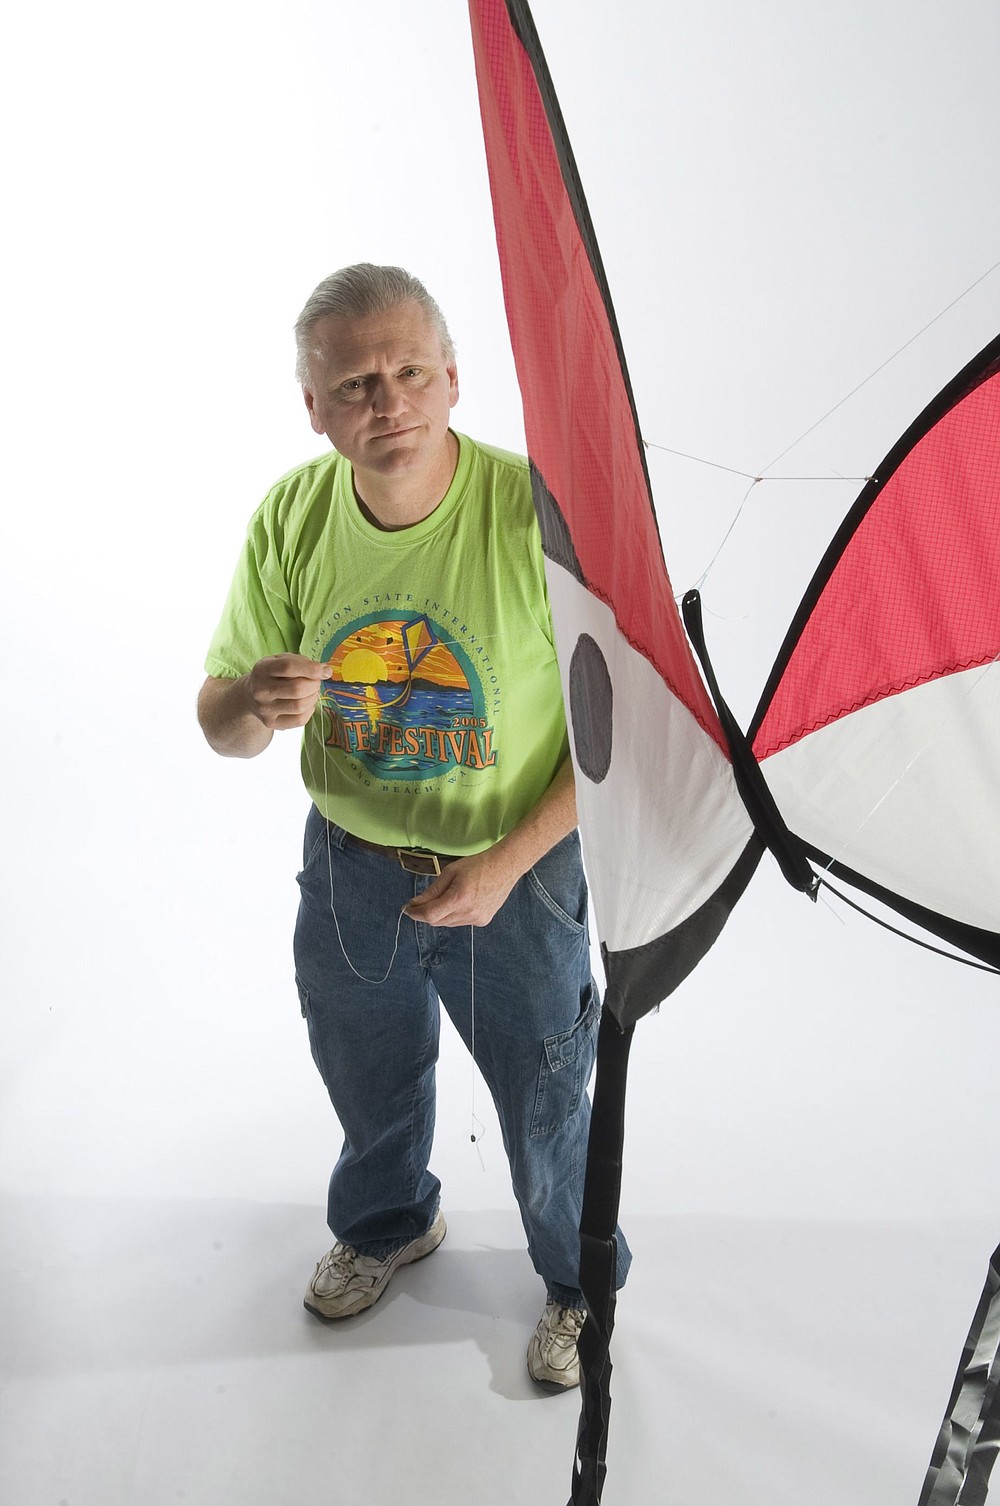 Bud Hayes, Camas Indoor Kite Festival co-organizer, has competed at the national level in indoor kite flying.